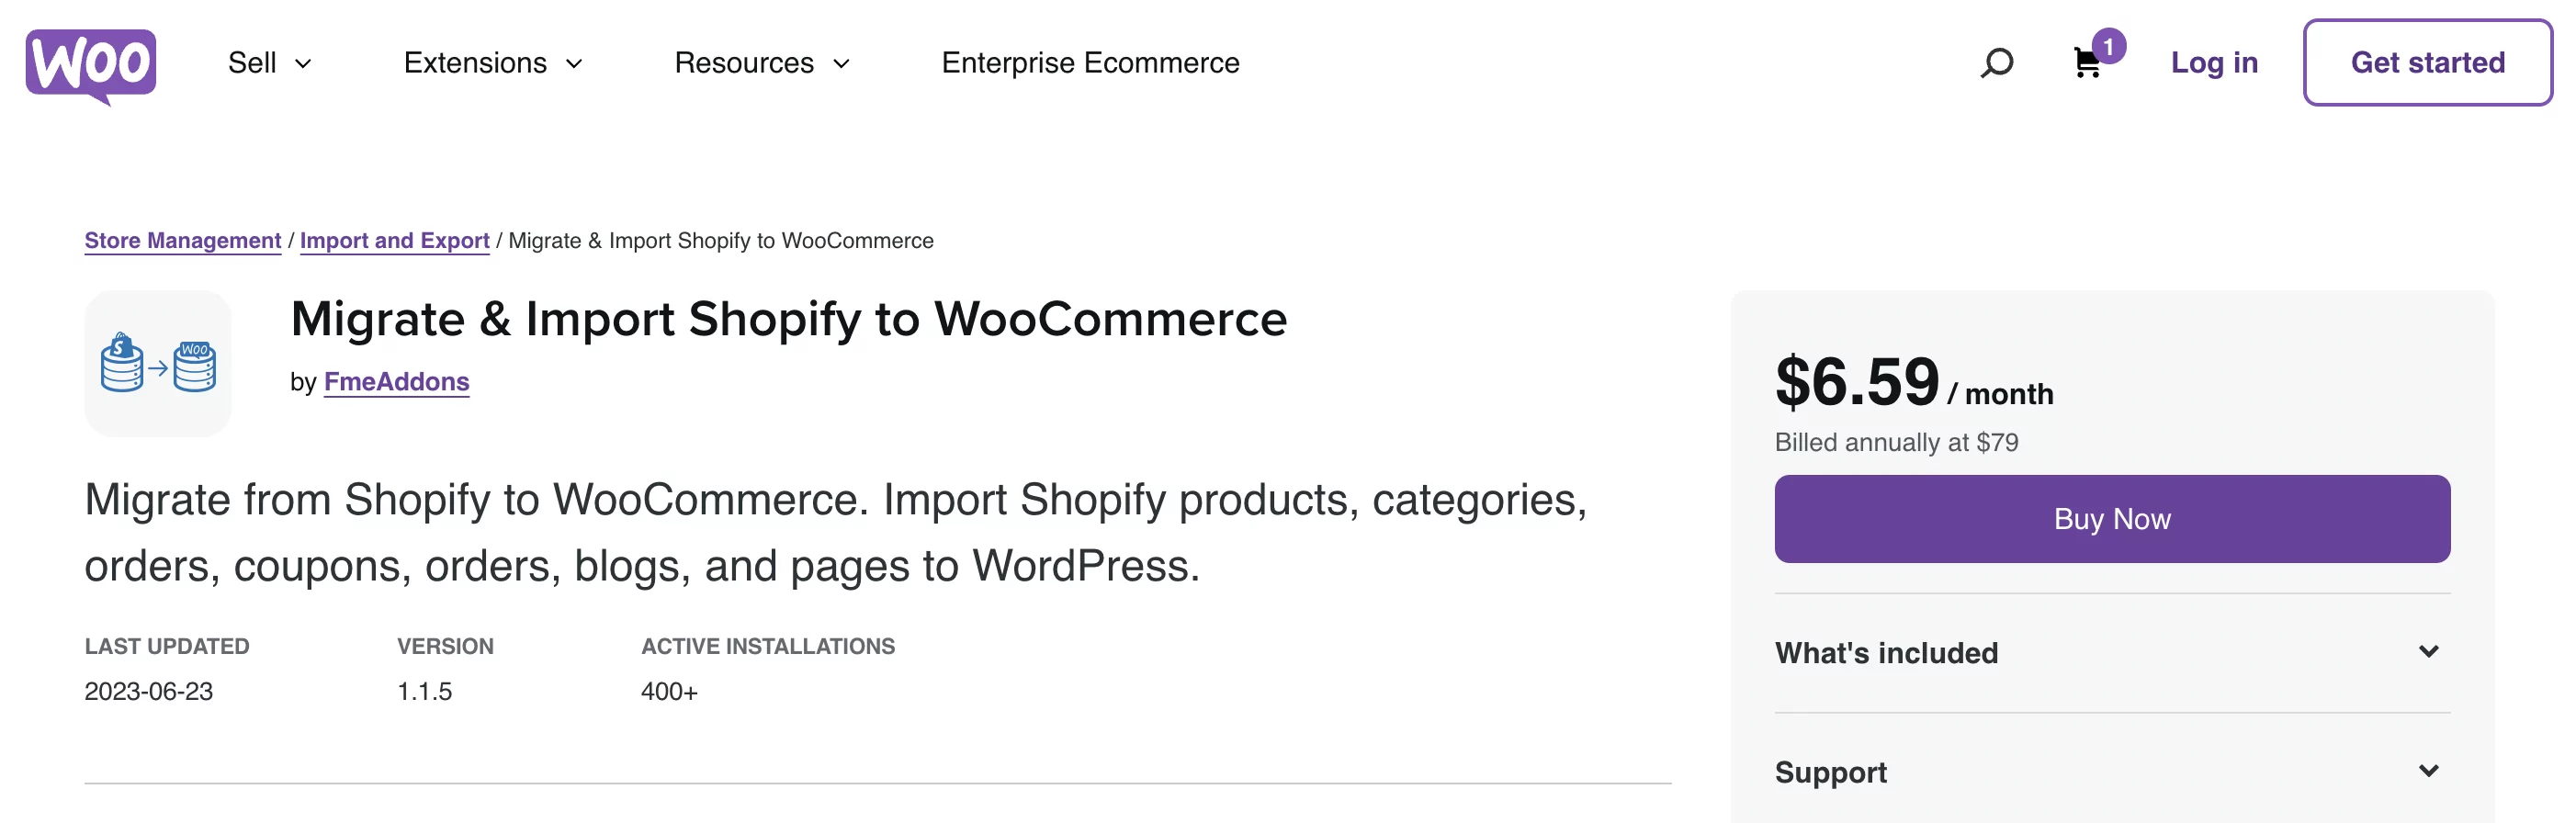 Migrate & Import Shopify to WooCommerce